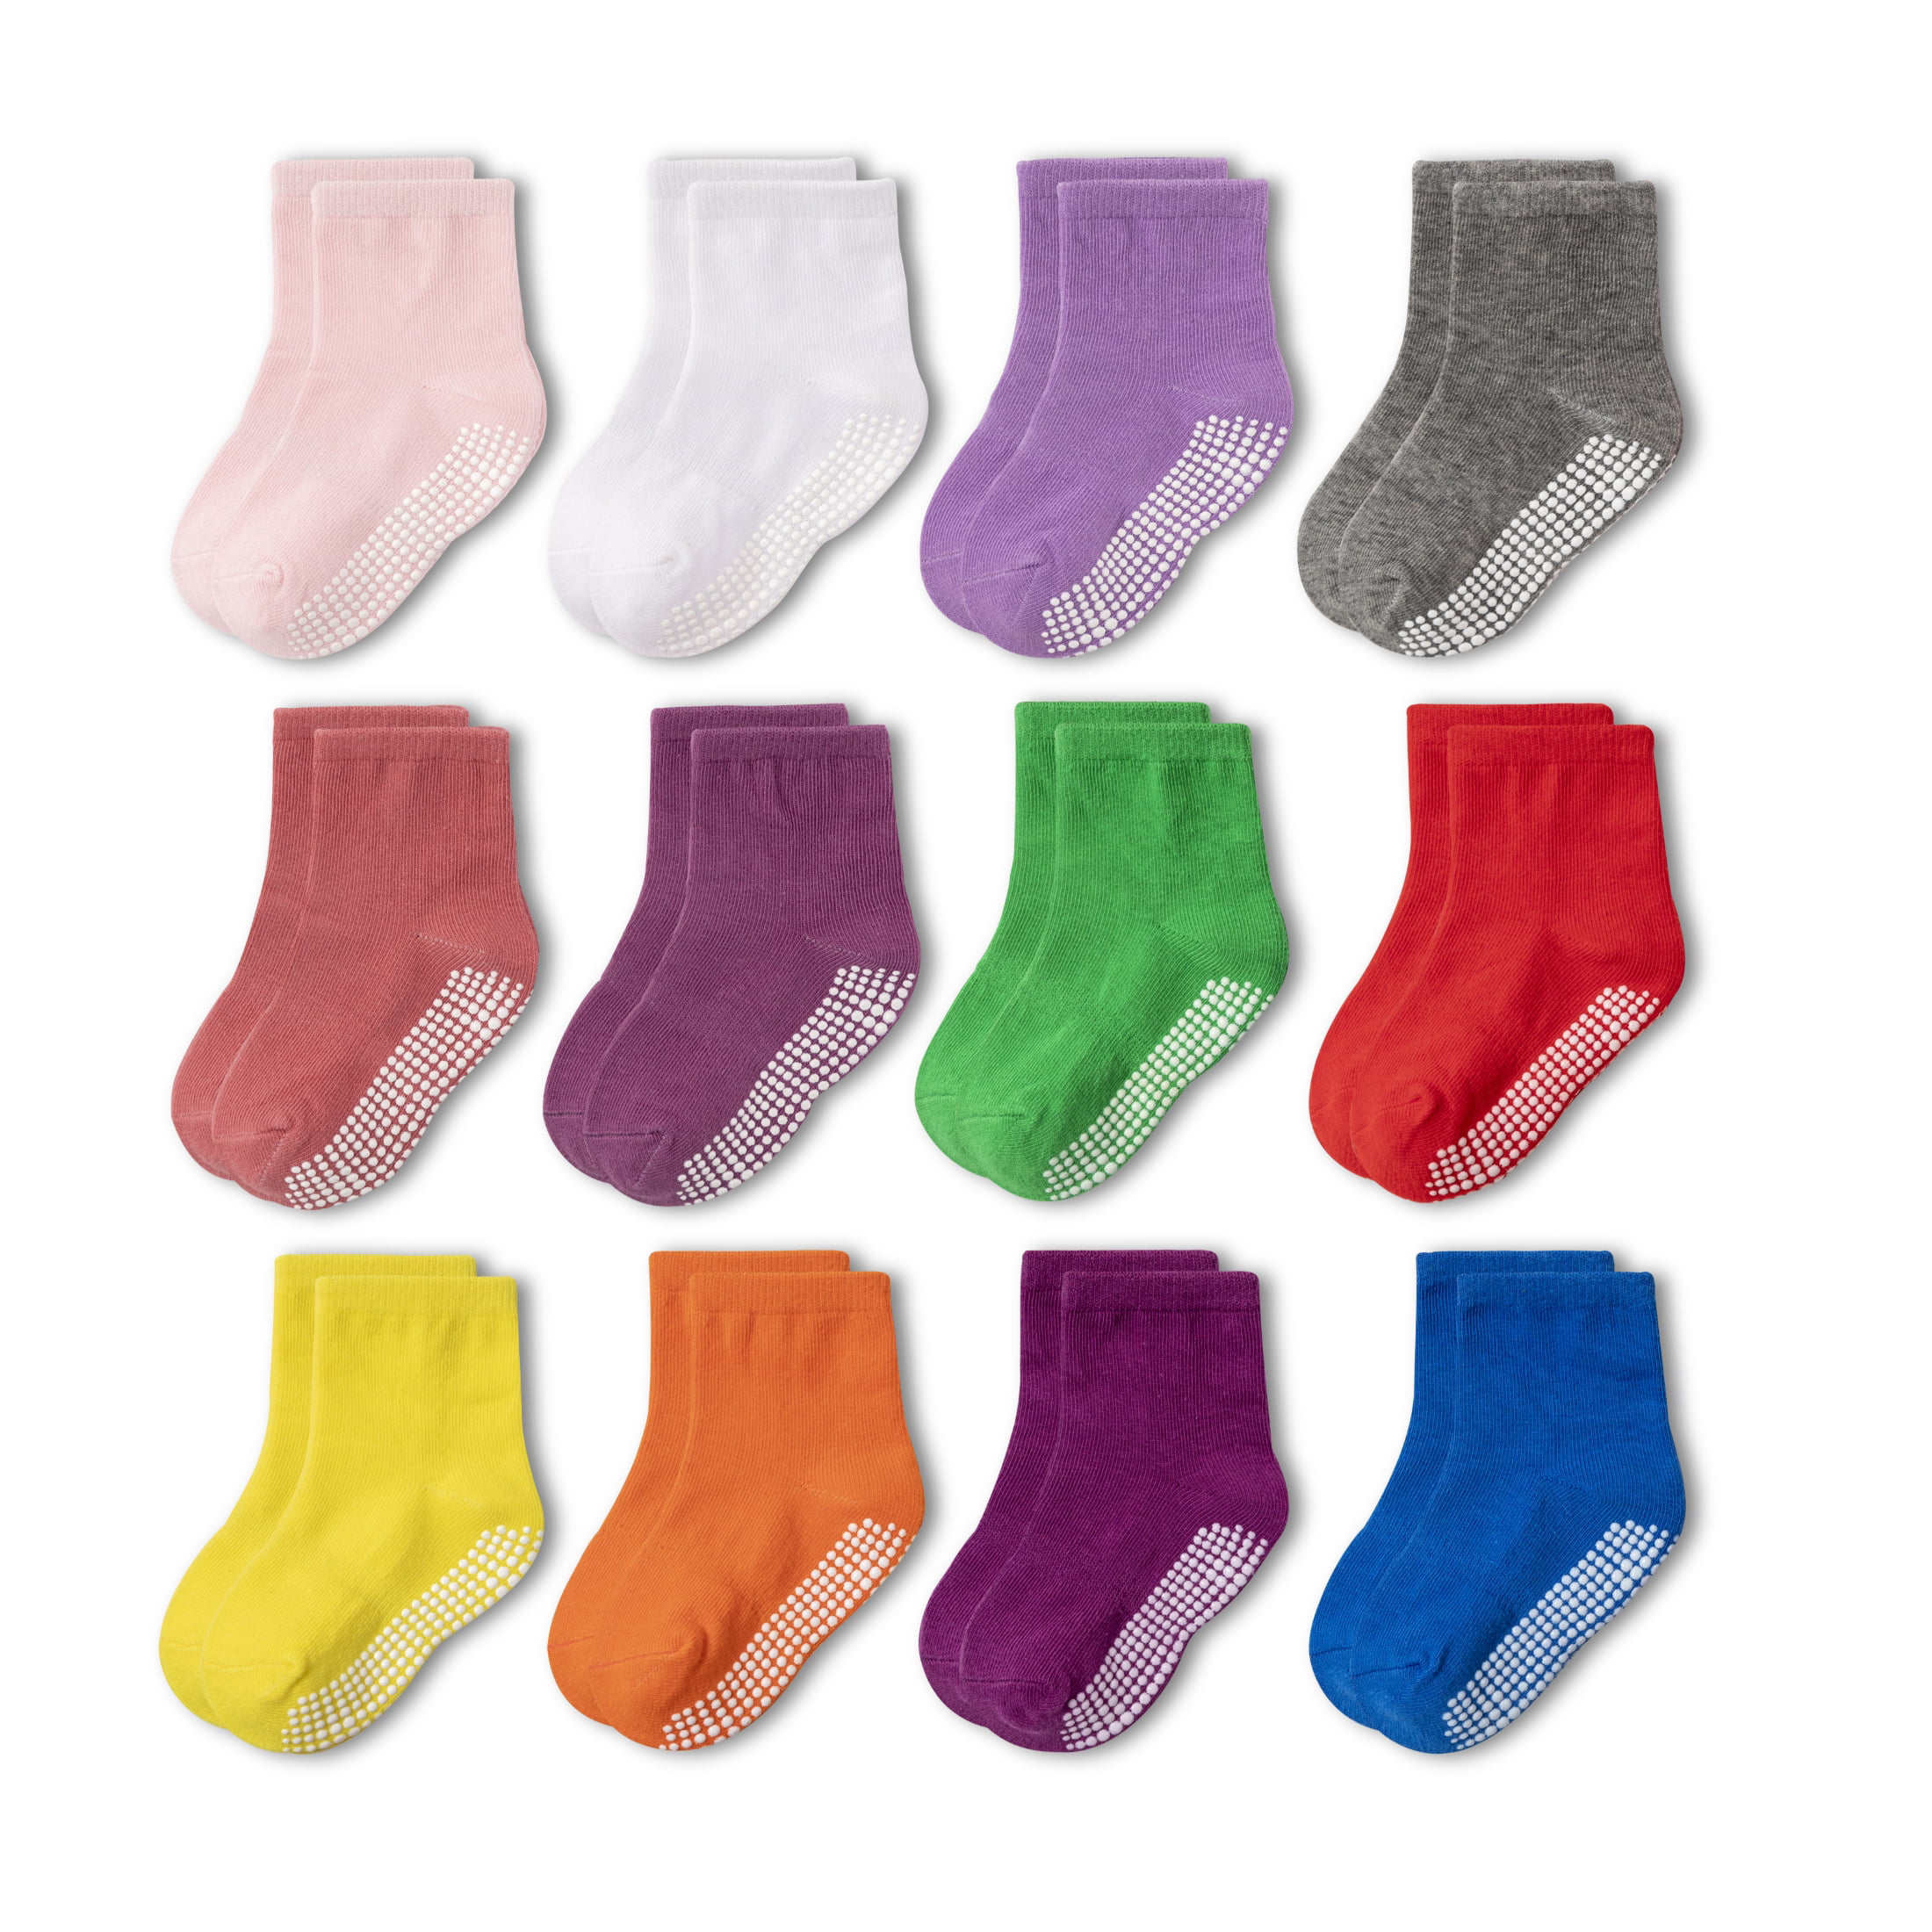 Dicry Baby Ankle Socks with Grips Toddler Girls Boys Non Slip/Anti Skid Socks for Infant Kids 6/12 Pairs 